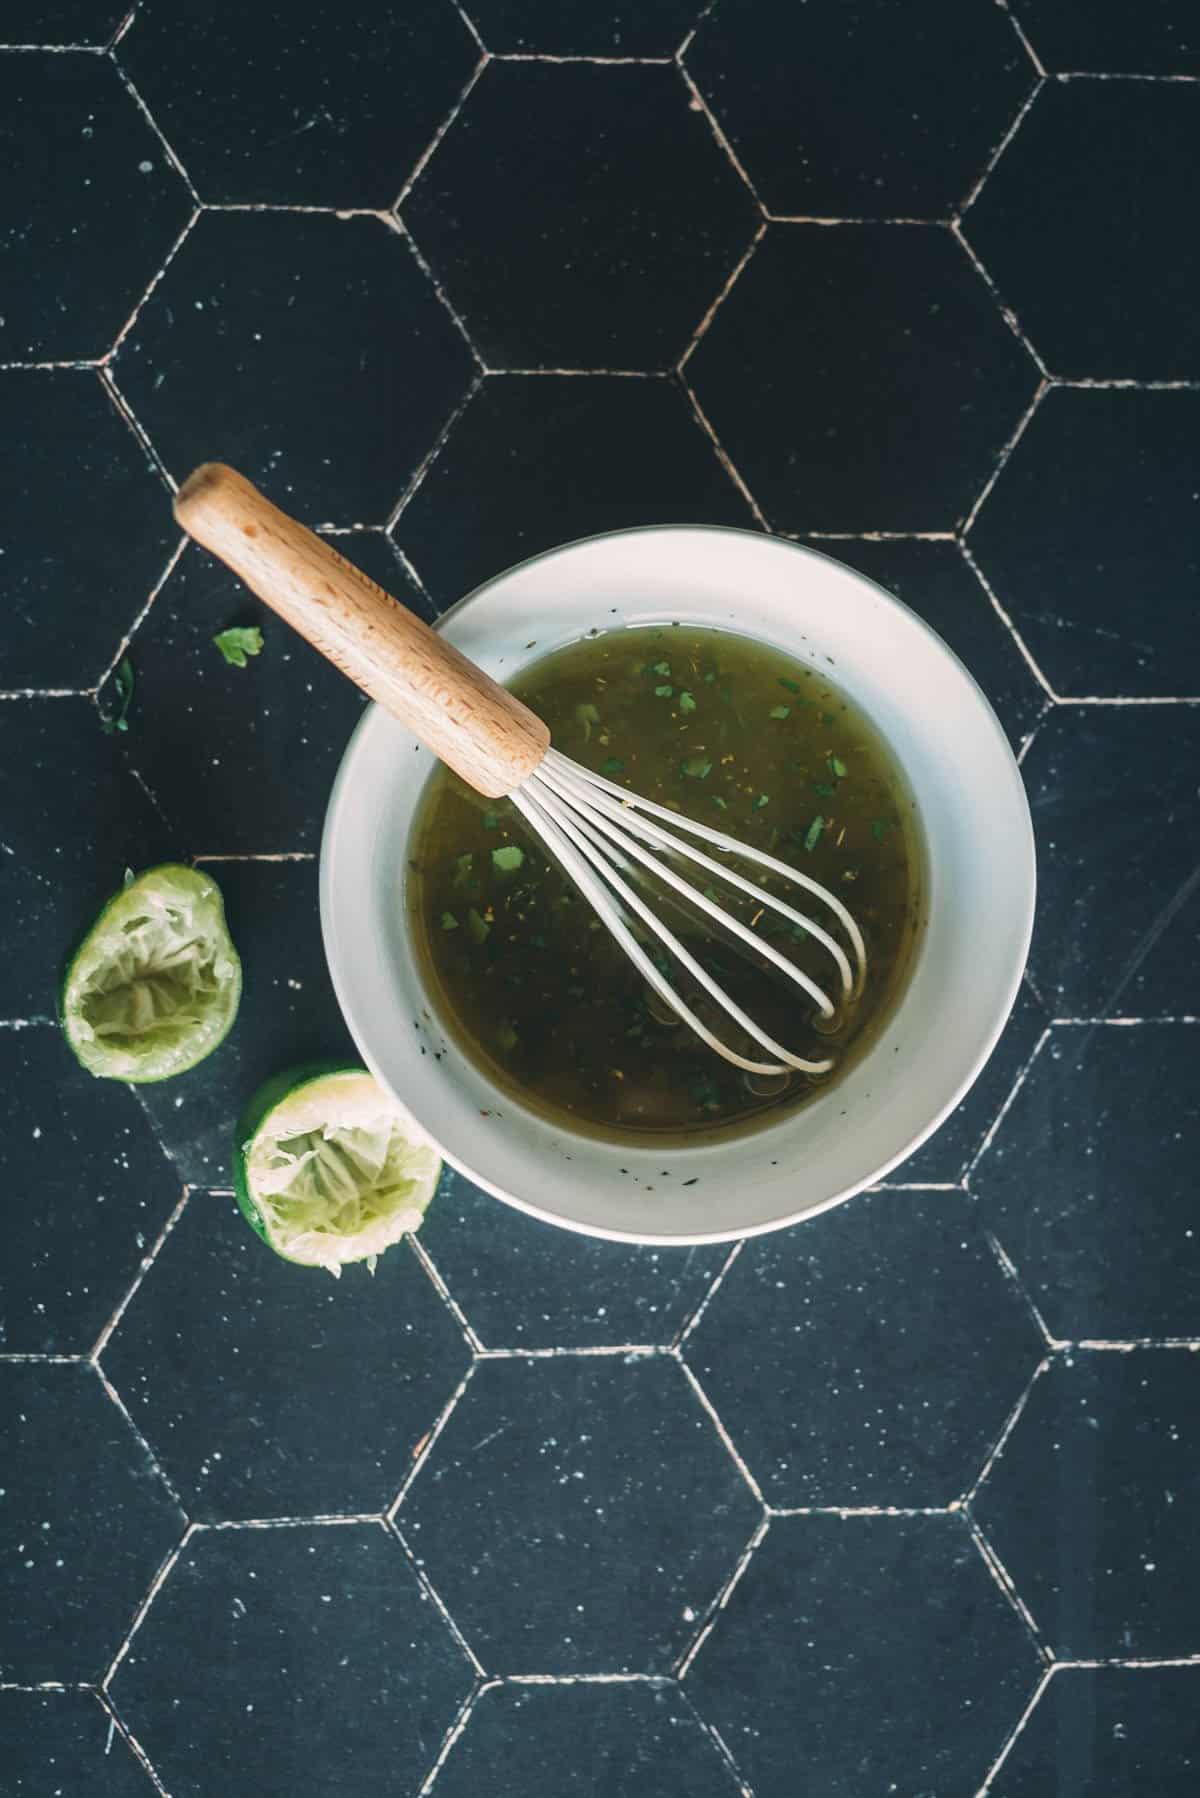 A bowl filled with a marinade, a whisk placed inside it, and two squeezed lime halves on a black hexagon-tiled surface.